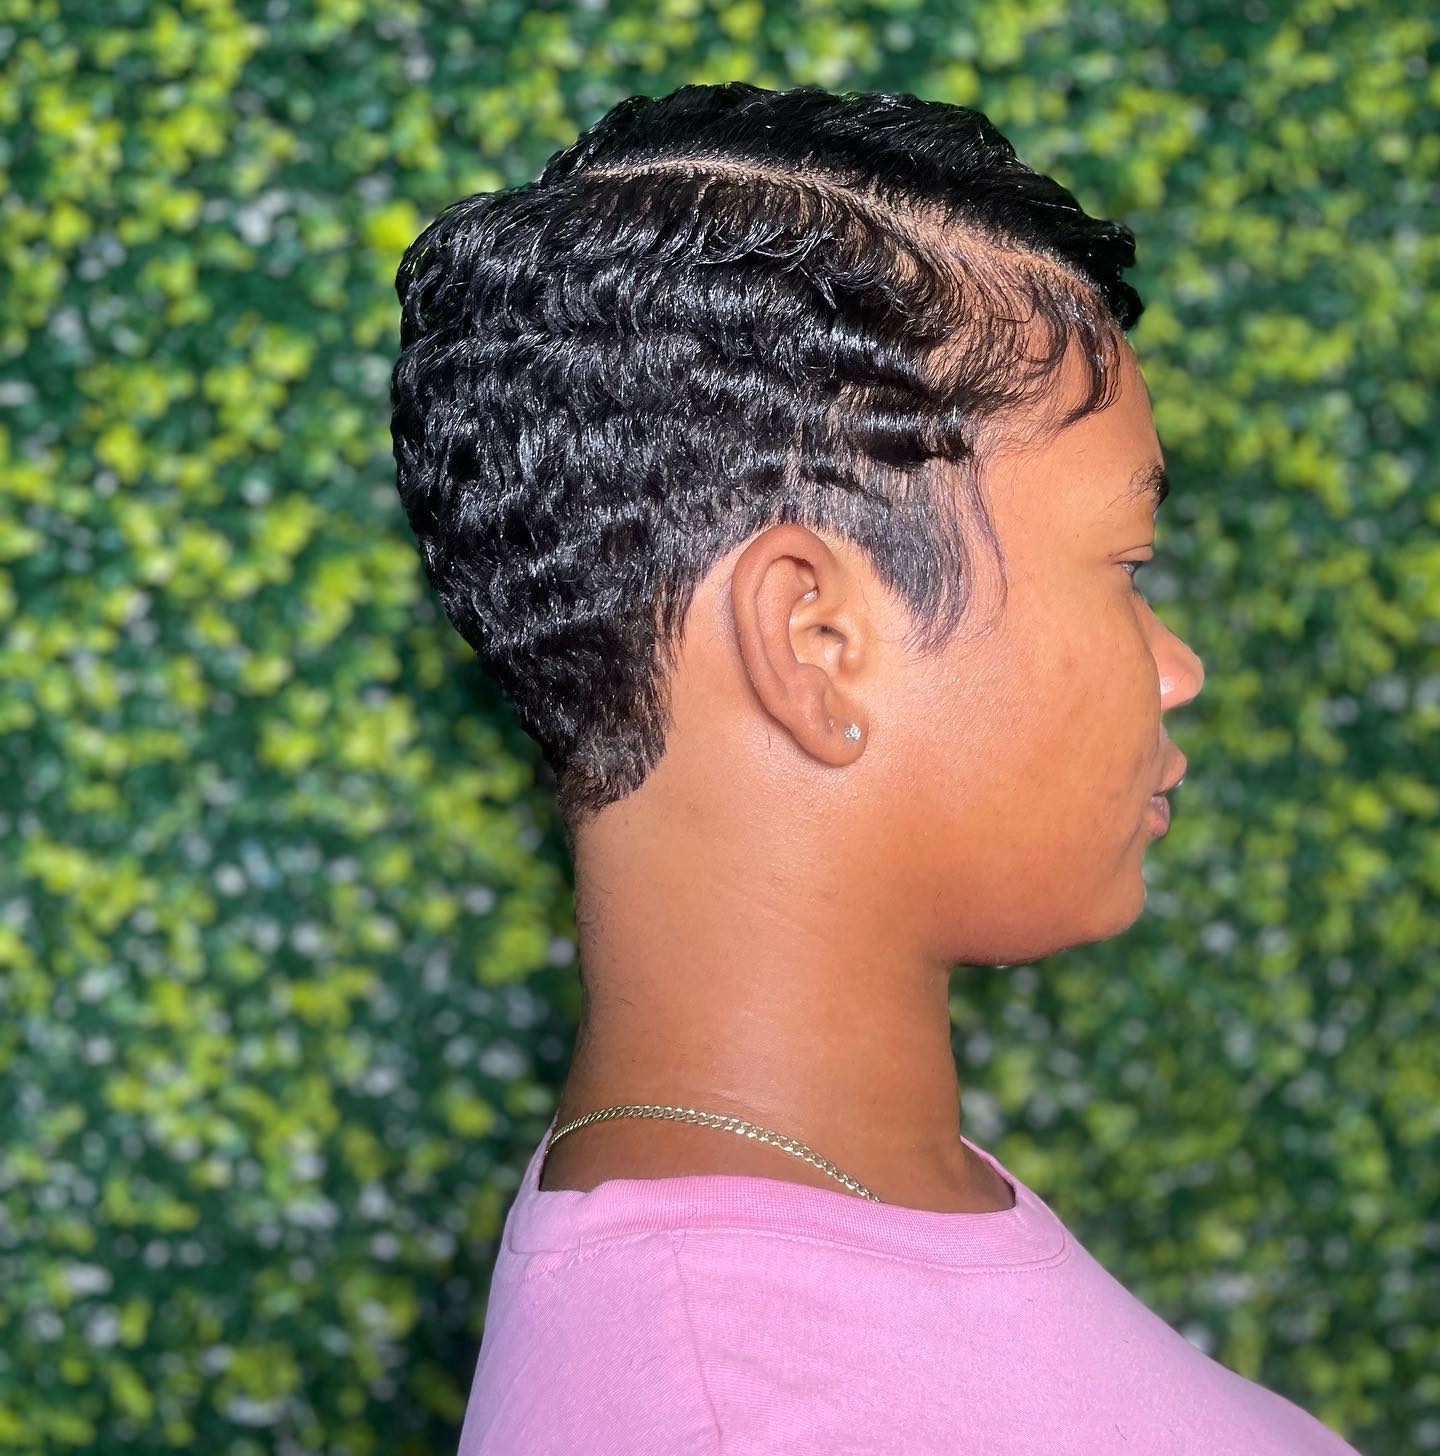 10 Best Short Hairstyles For Black Women - Let's Find Out! - Greg Decker